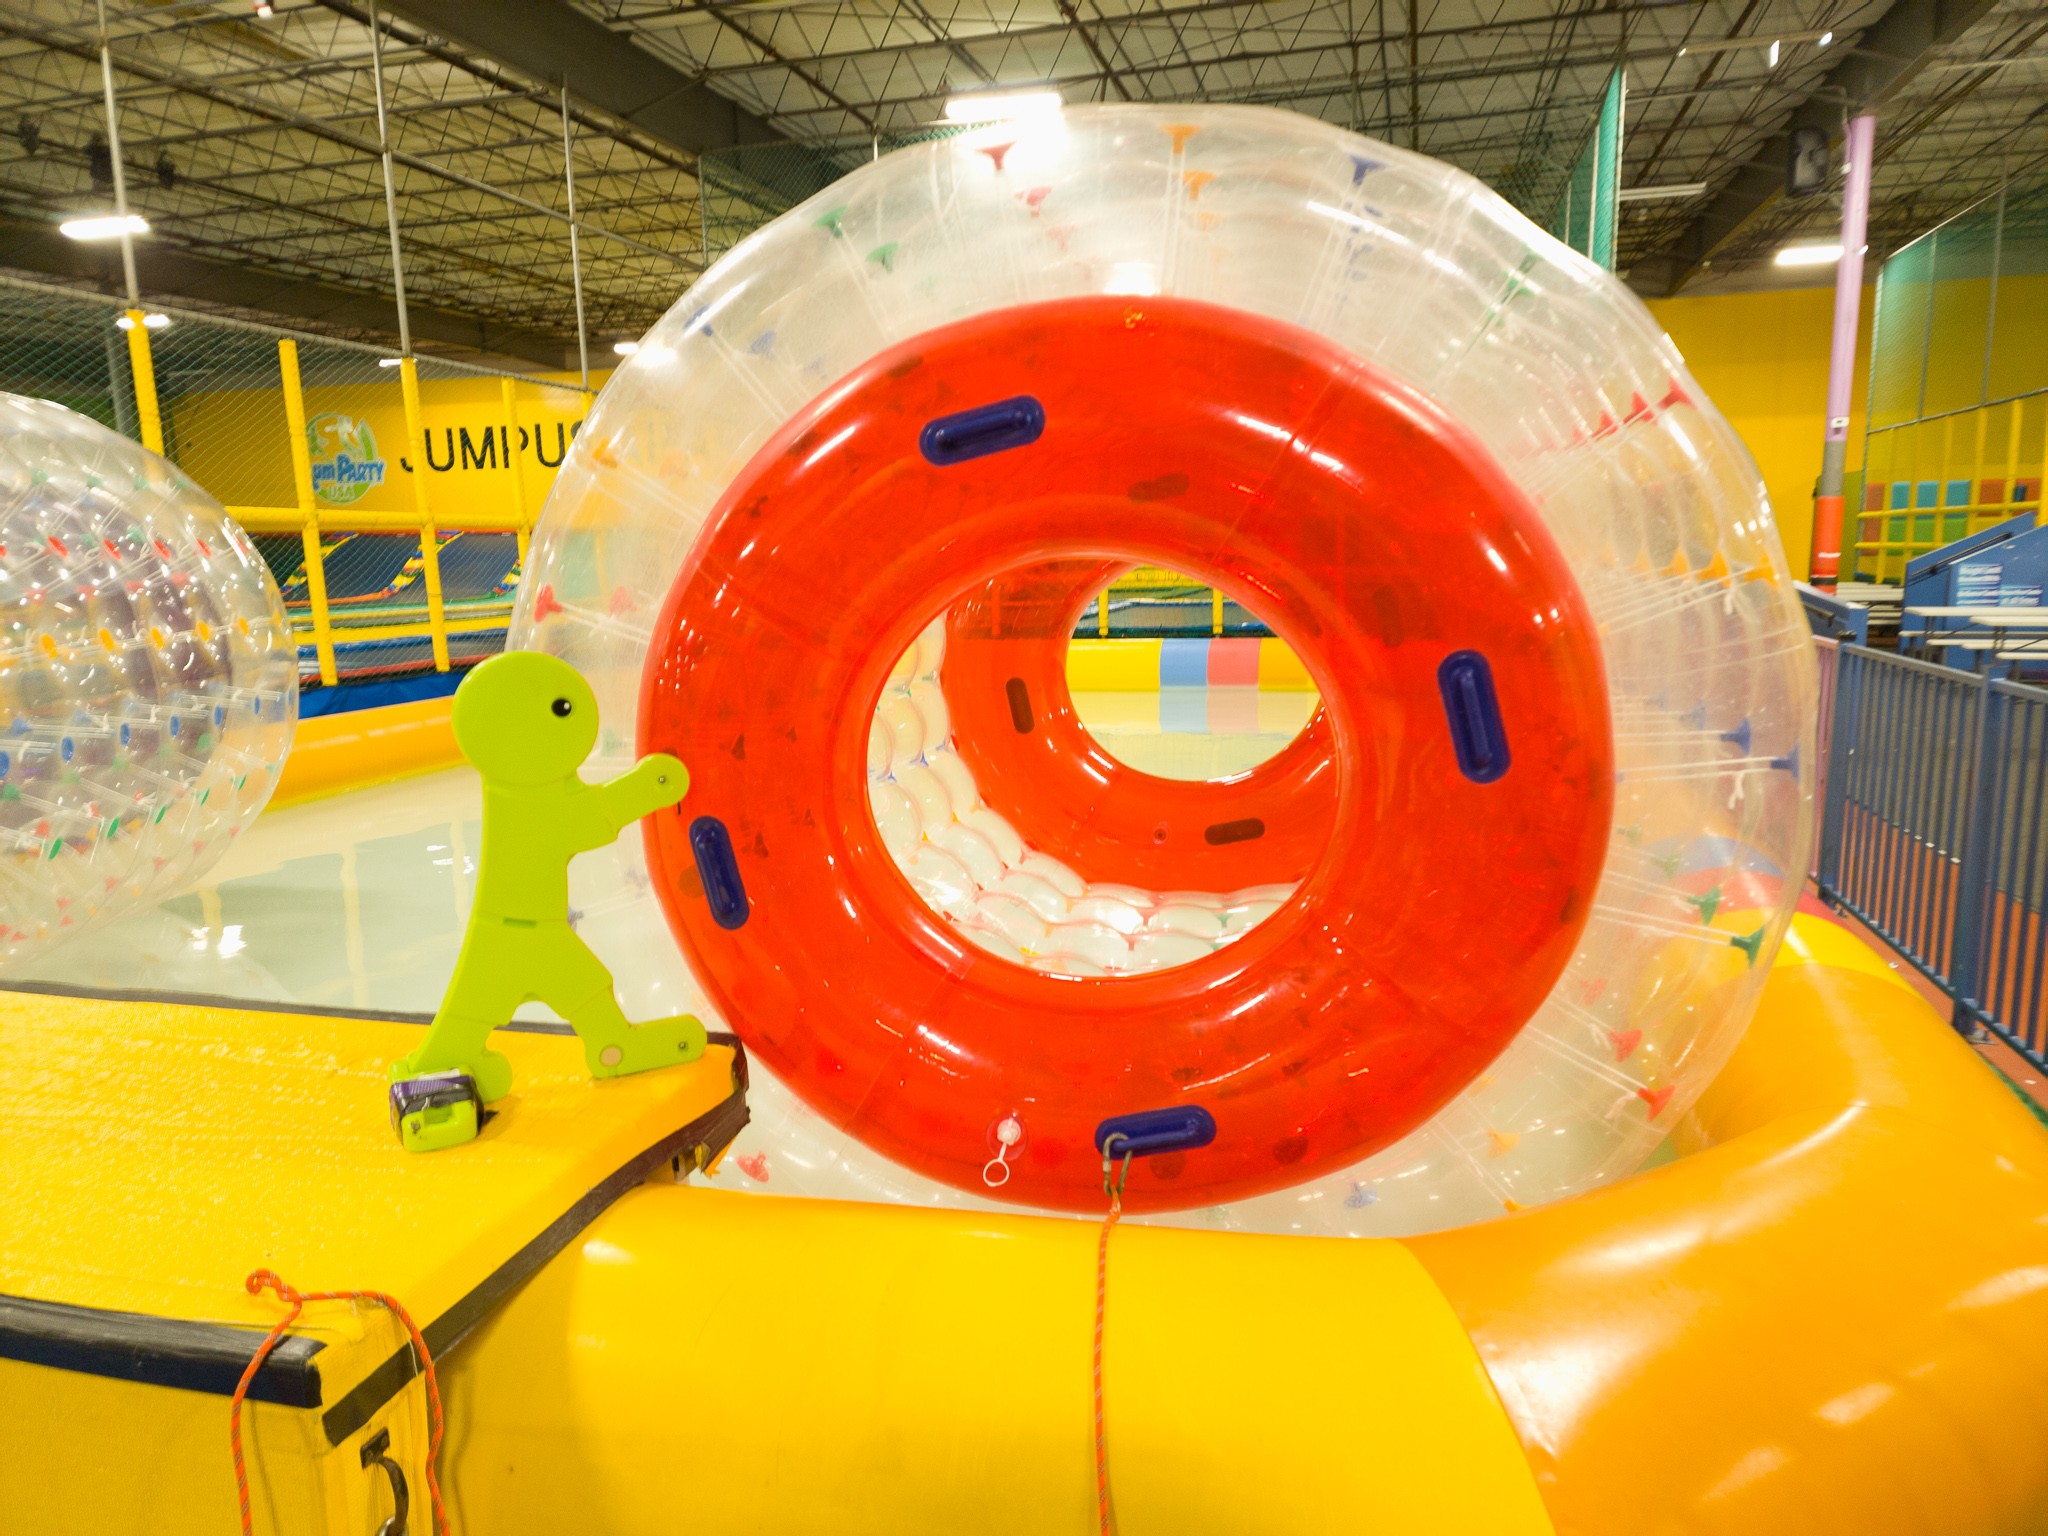 Jump Party USA is the only park in Austin with Water Roller Balls perfect for a pair of kids or adults to roll in